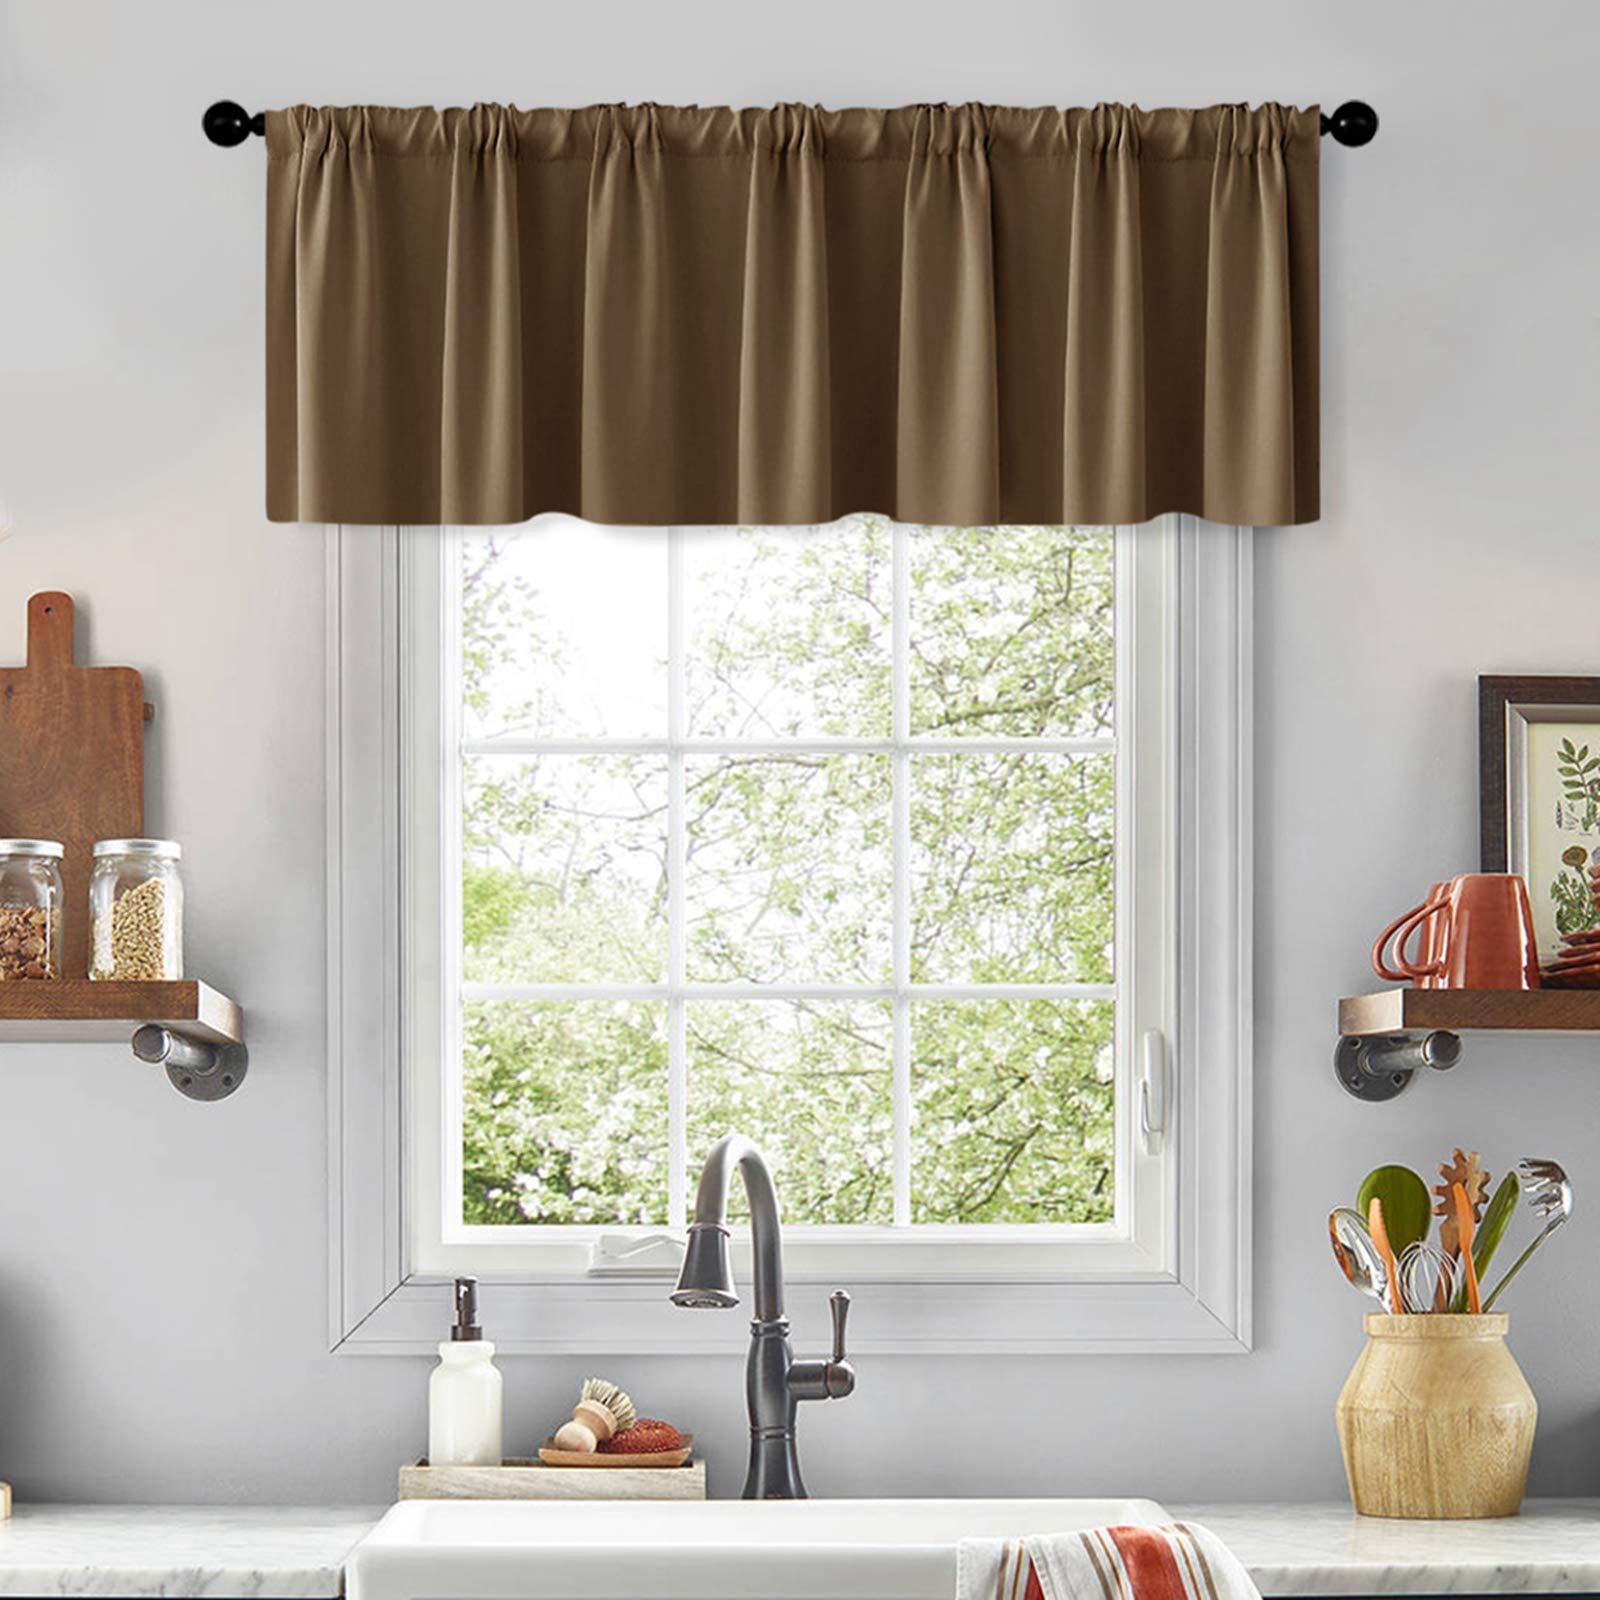 10 Superior Brown Valances For Windows For 2023 1697531228 